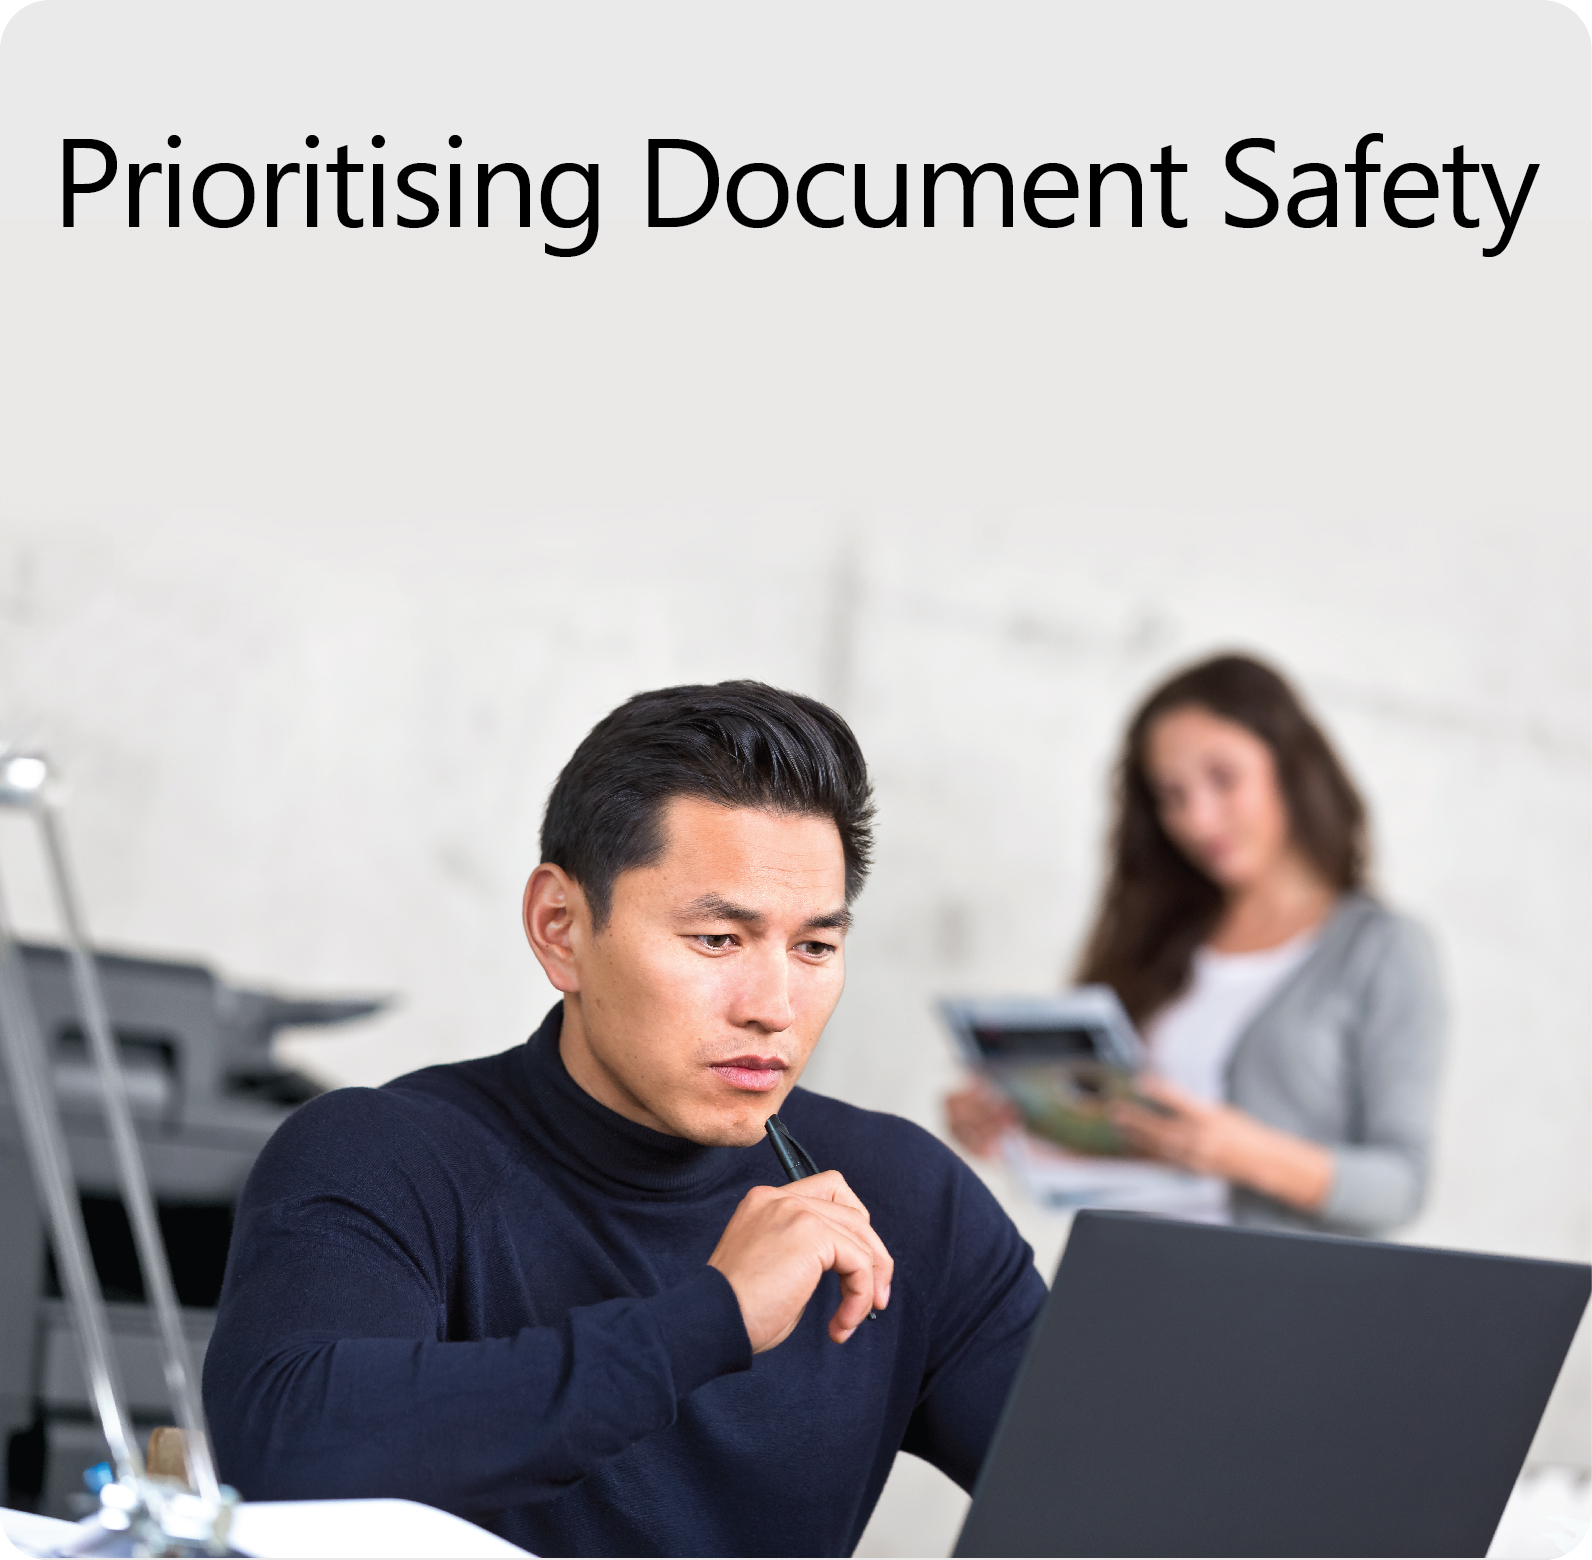 Document Safety Takes Priority